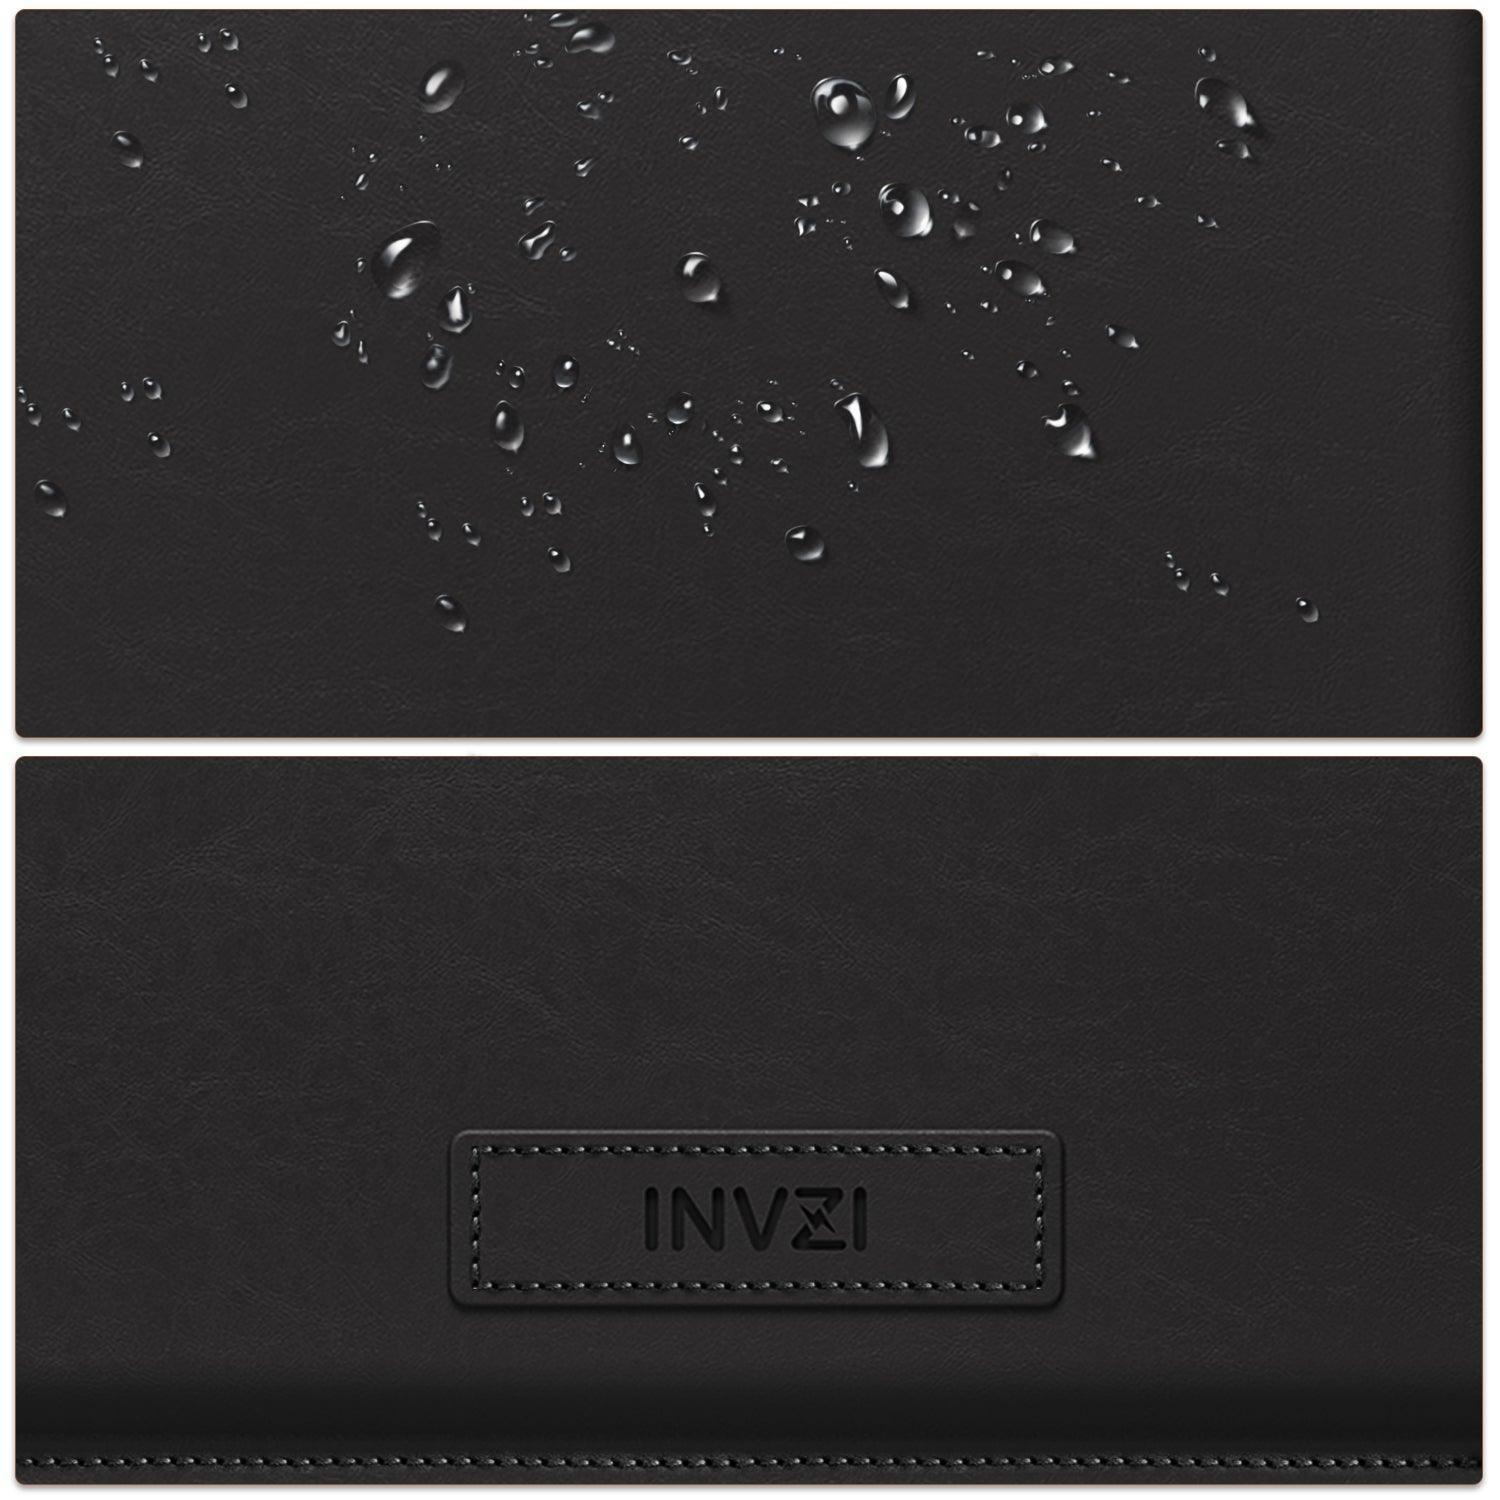 INVZI Laptop Sleeve INVZI Vegan Leather MacBook Sleeve and Invisible Stand for MacBook Pro & MacBook Air